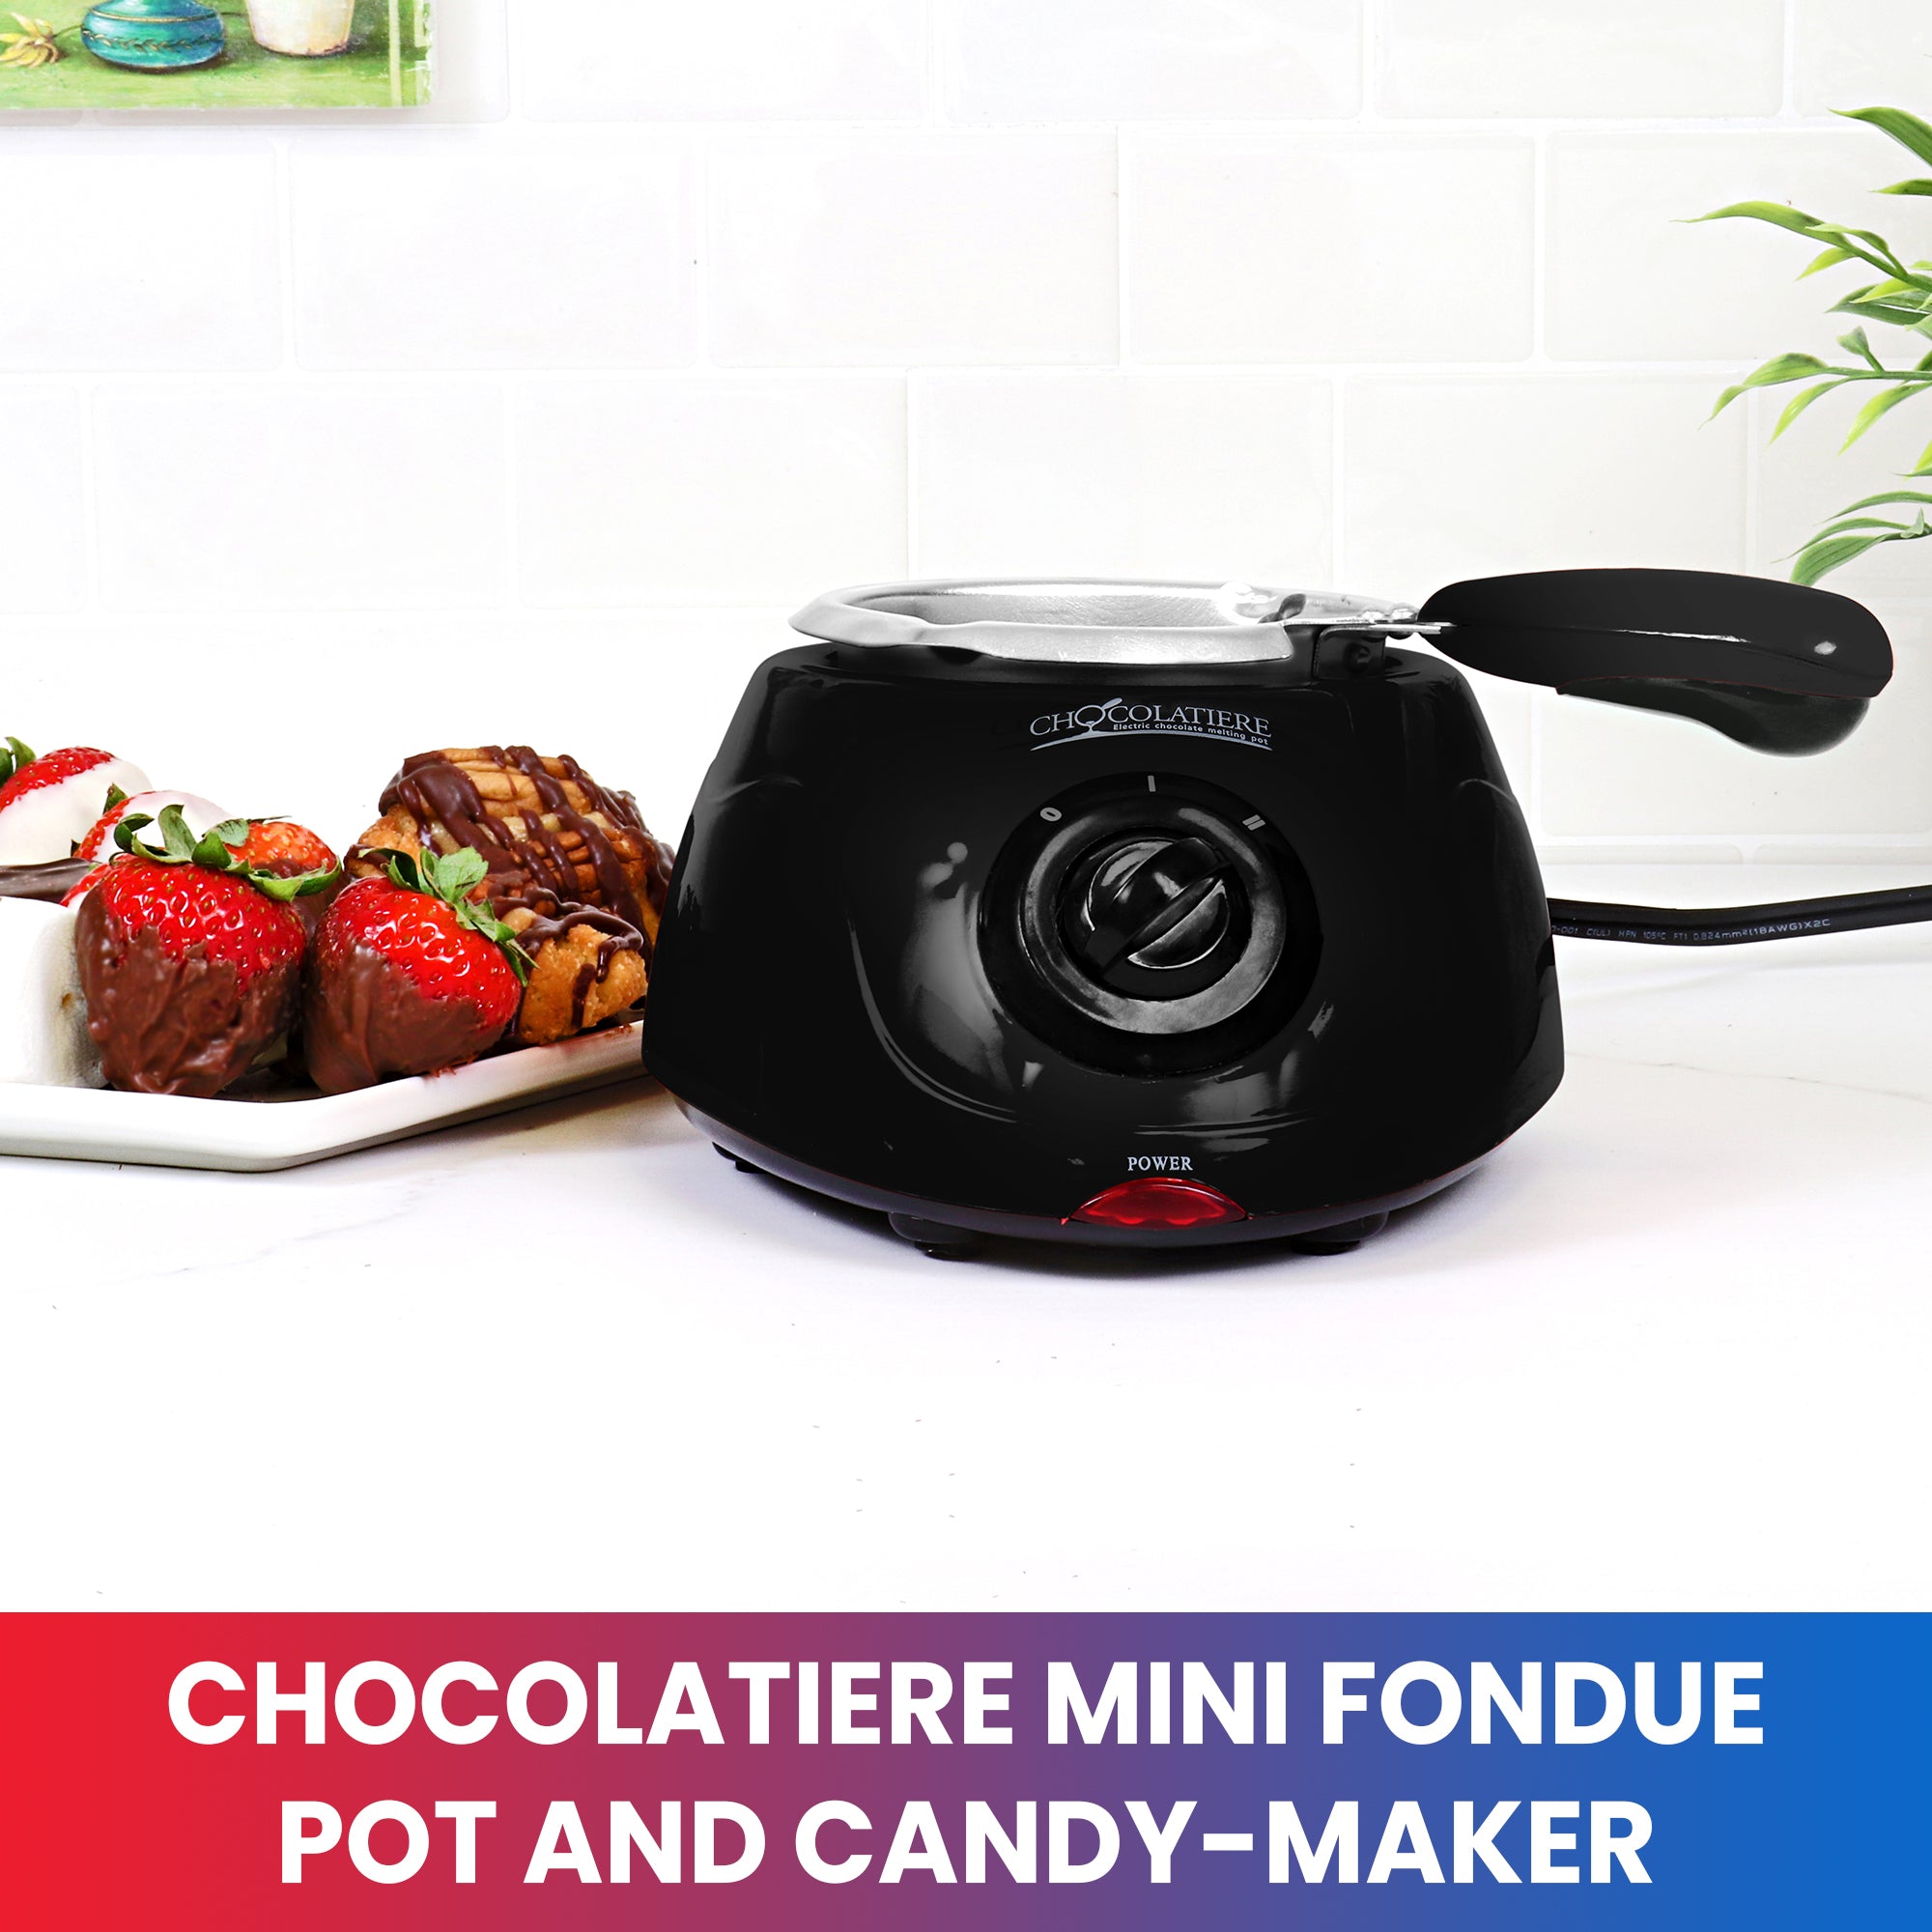 Total Chef Chocolatiere Electric Melter for Chocolate and Candy Melts, 8.8 oz (250 g), Fondue Pot, DIY Candy Maker with 32-Piece Accessory Kit for Dessert, Special Occasion, Romantic Dinner, Black